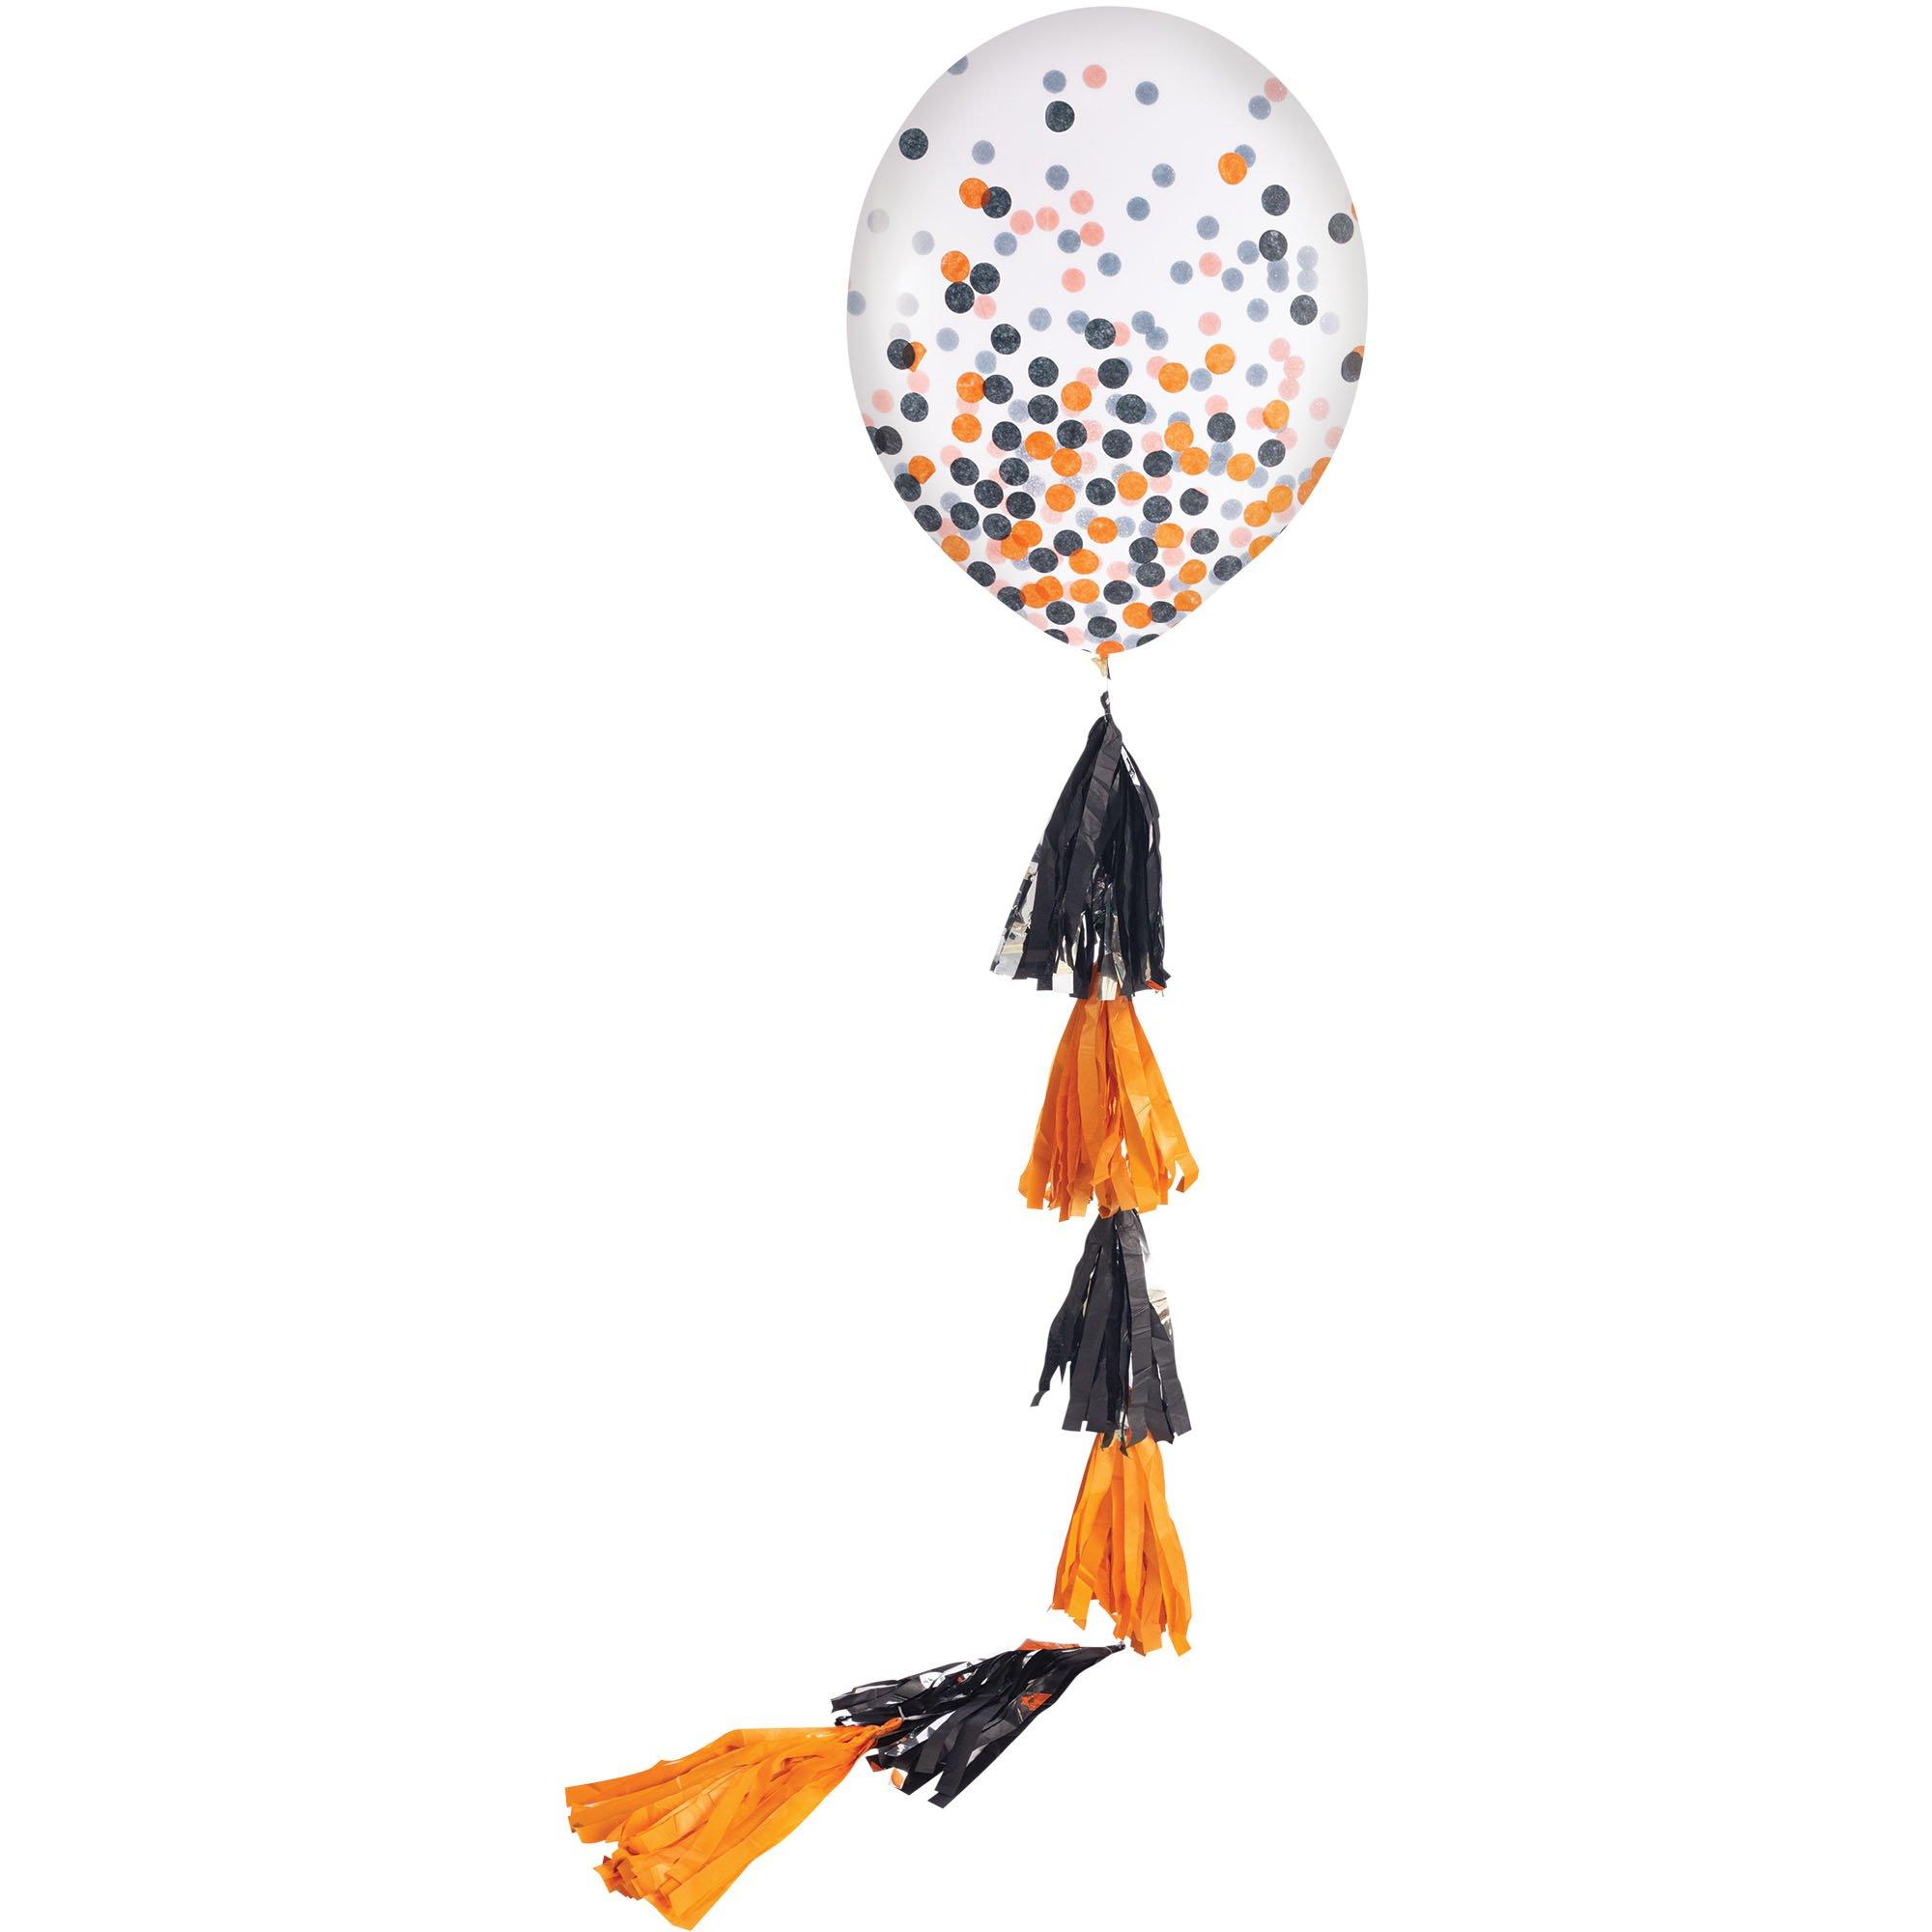 1ct, 24in, Rose Gold & White Confetti Balloon with Tassel Tail